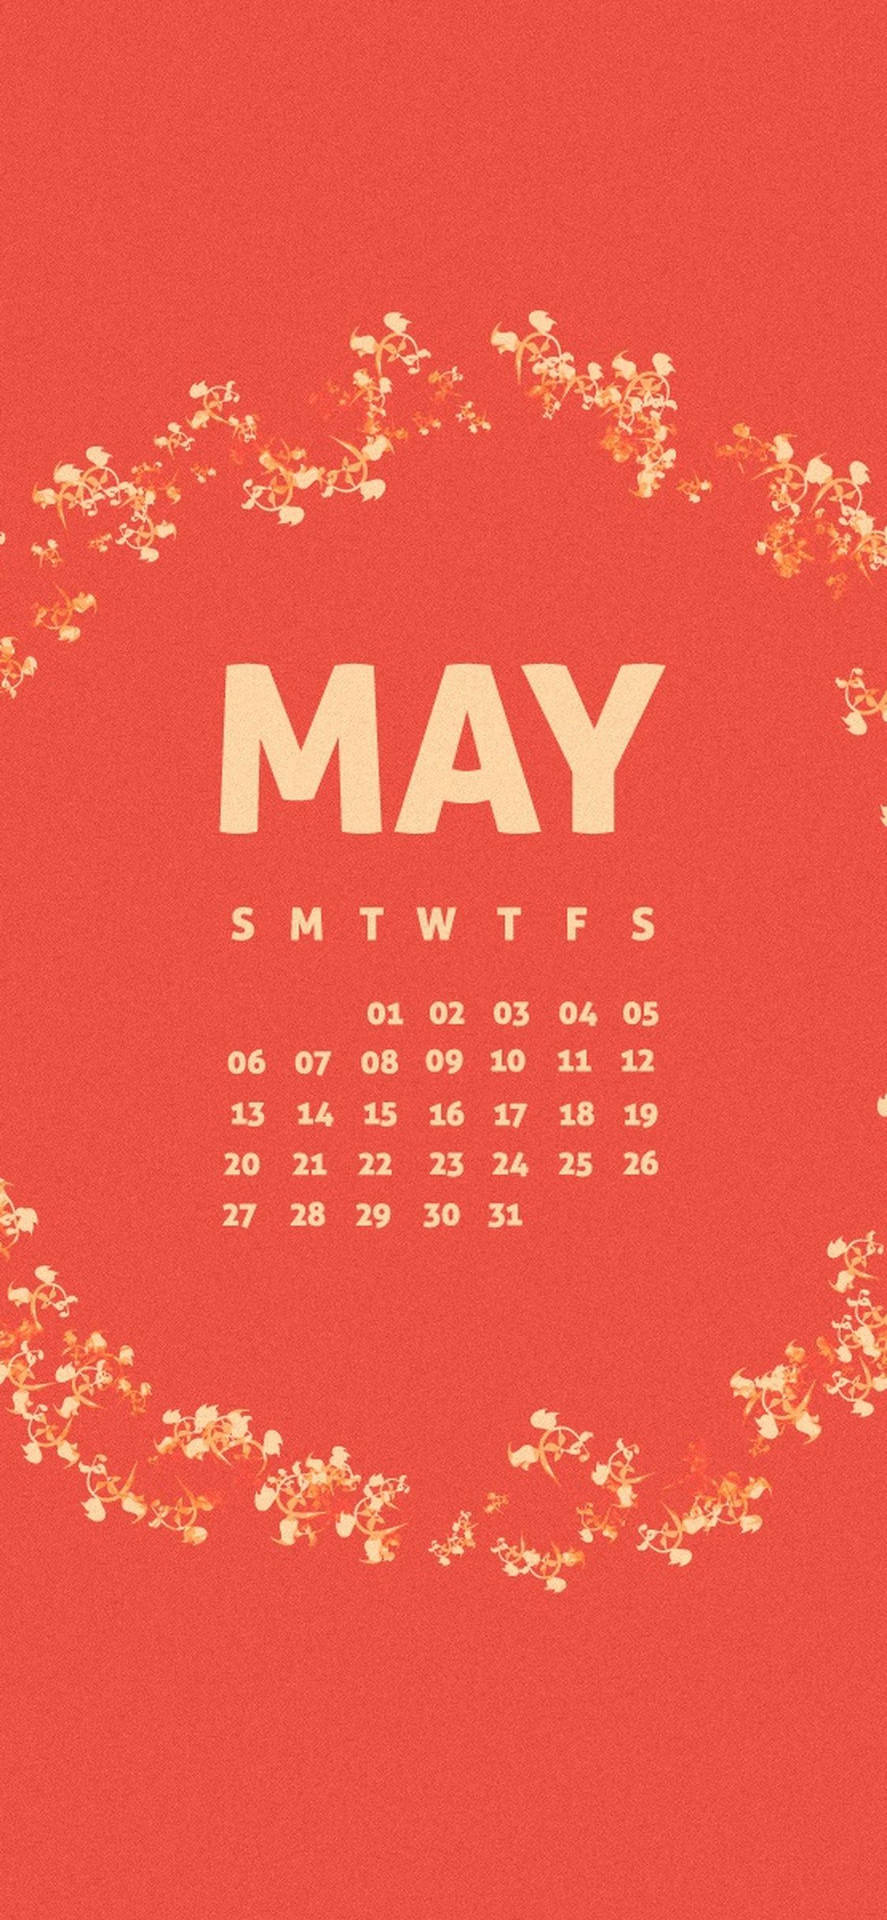 Celebrate the beauty of May with a red calendar full of vibrant flowers Wallpaper